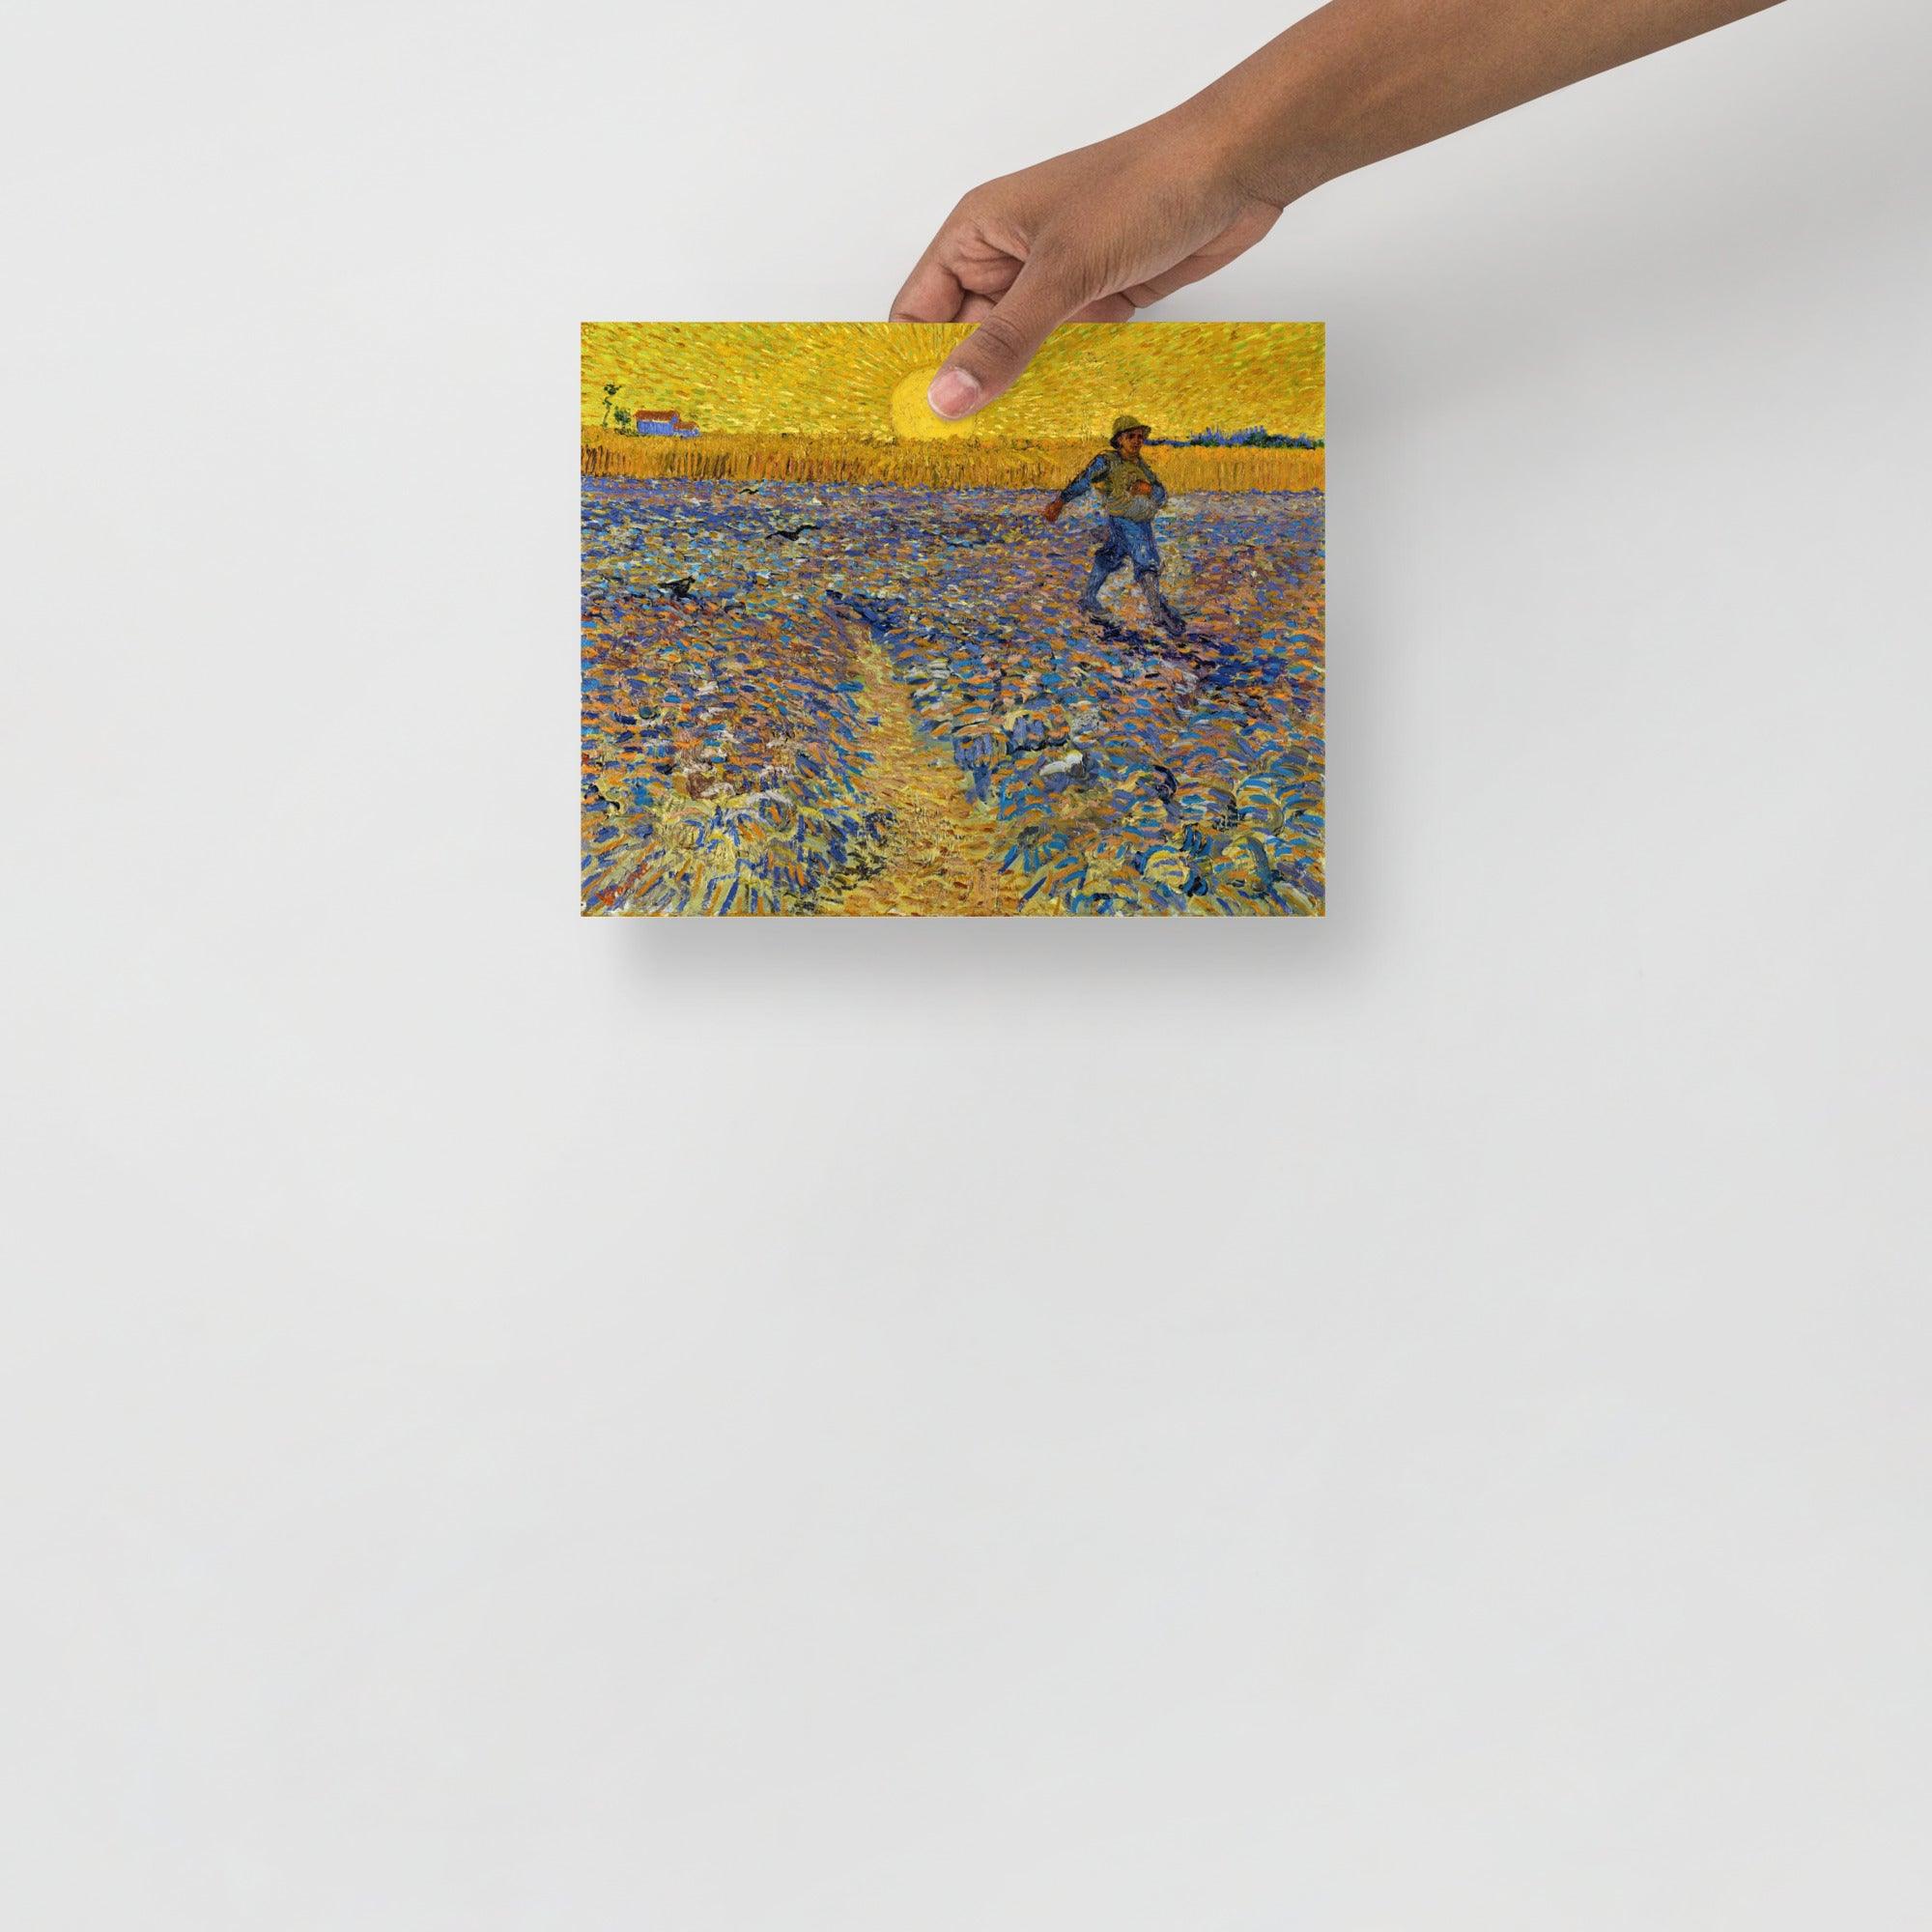 The Sower by Vincent Van Gogh poster on a plain backdrop in size 8x10”.